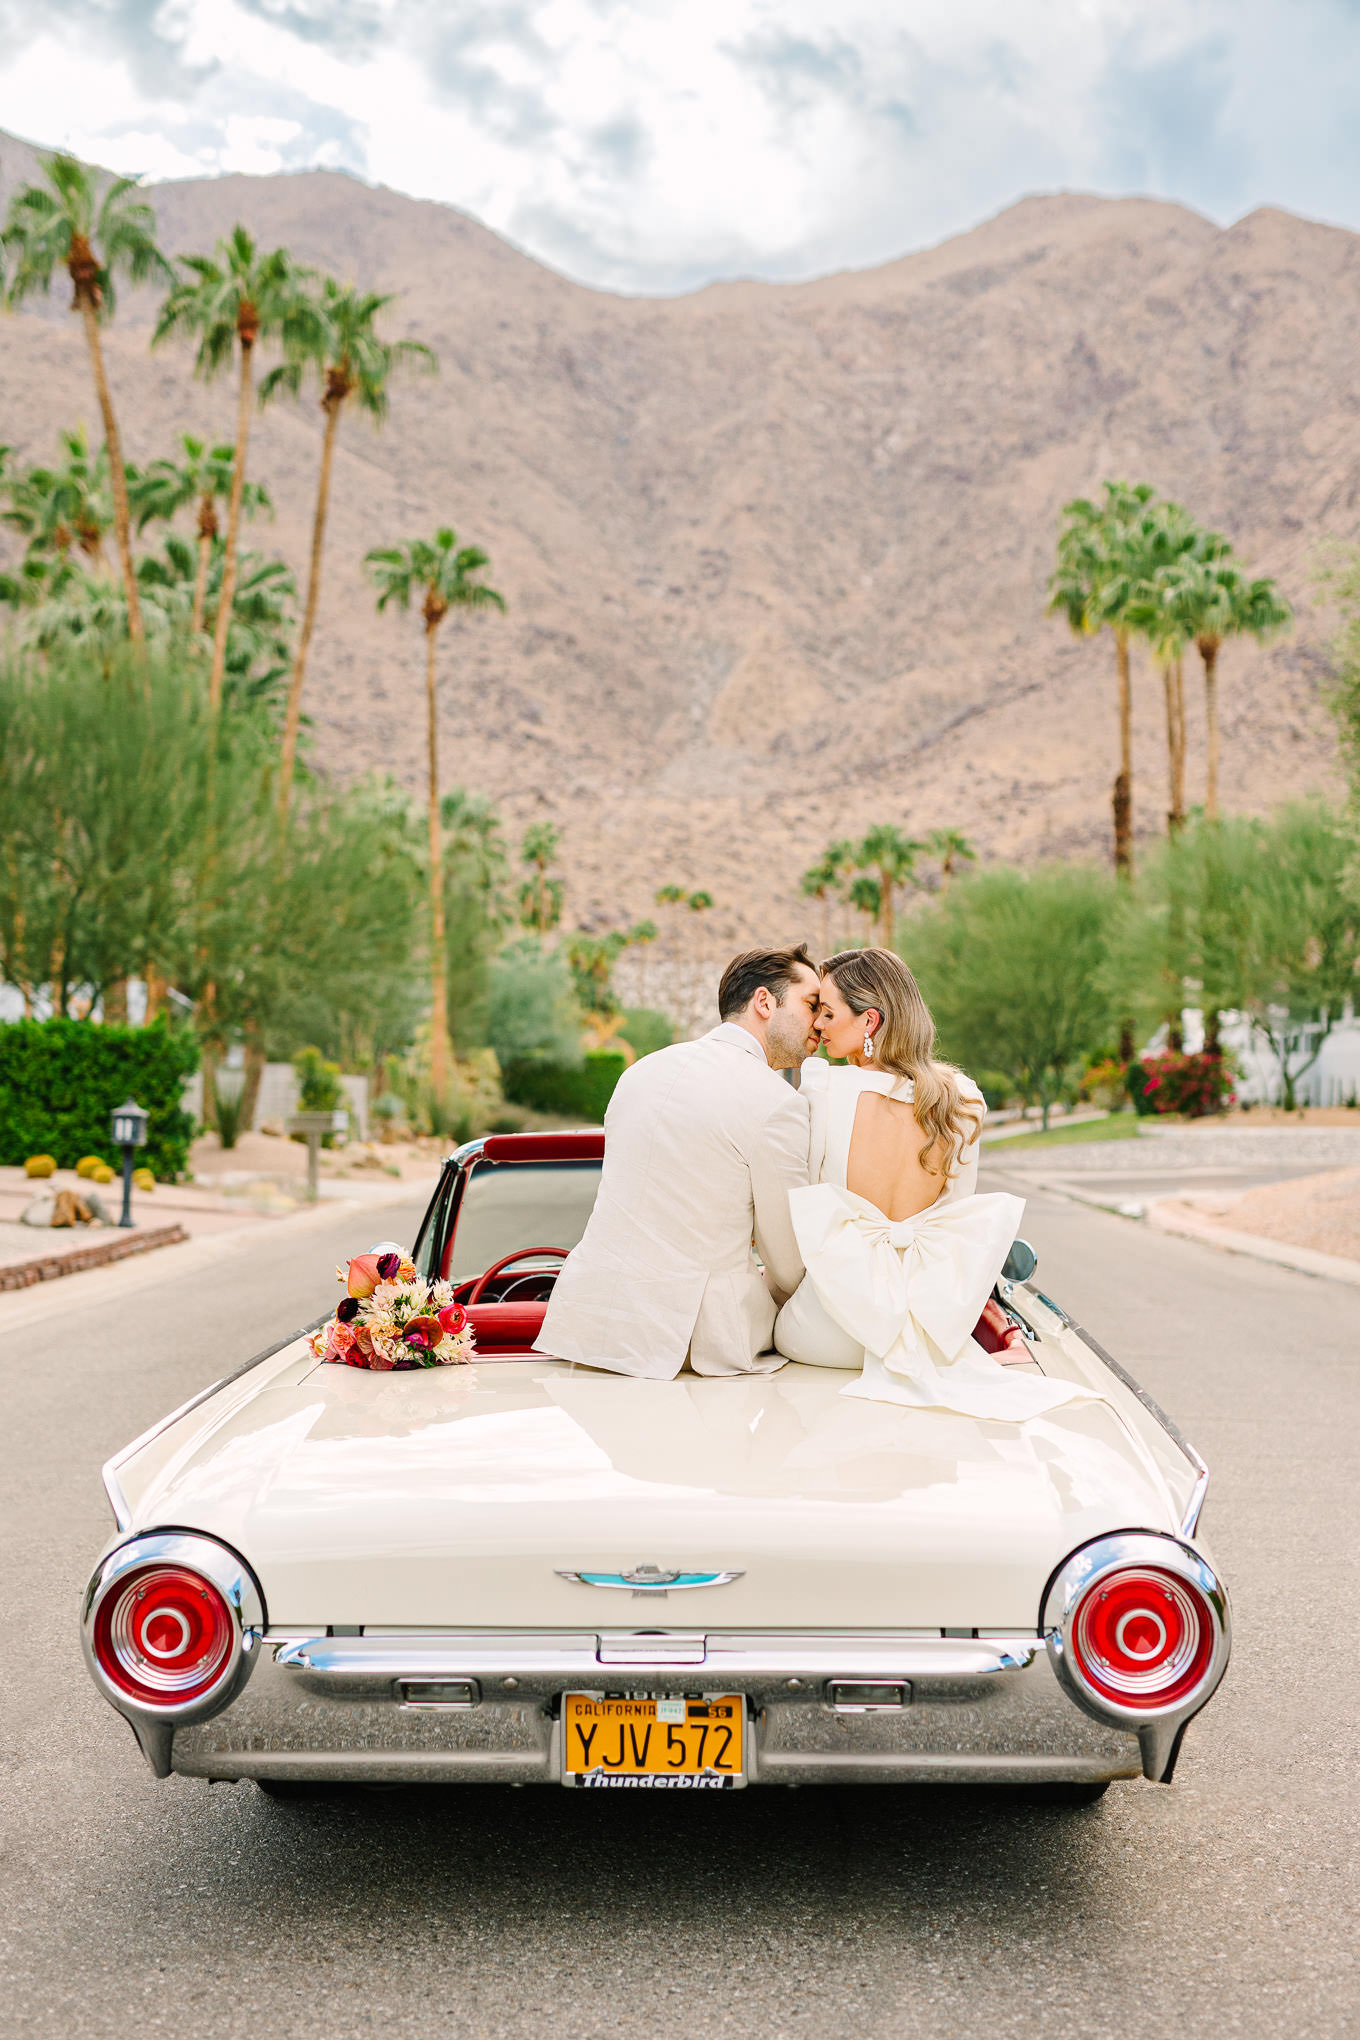 Palm Springs elopement | Wedding and elopement photography roundup | Los Angeles and Palm Springs  photographer | #losangeleswedding #palmspringswedding #elopementphotographer

Source: Mary Costa Photography | Los Angeles